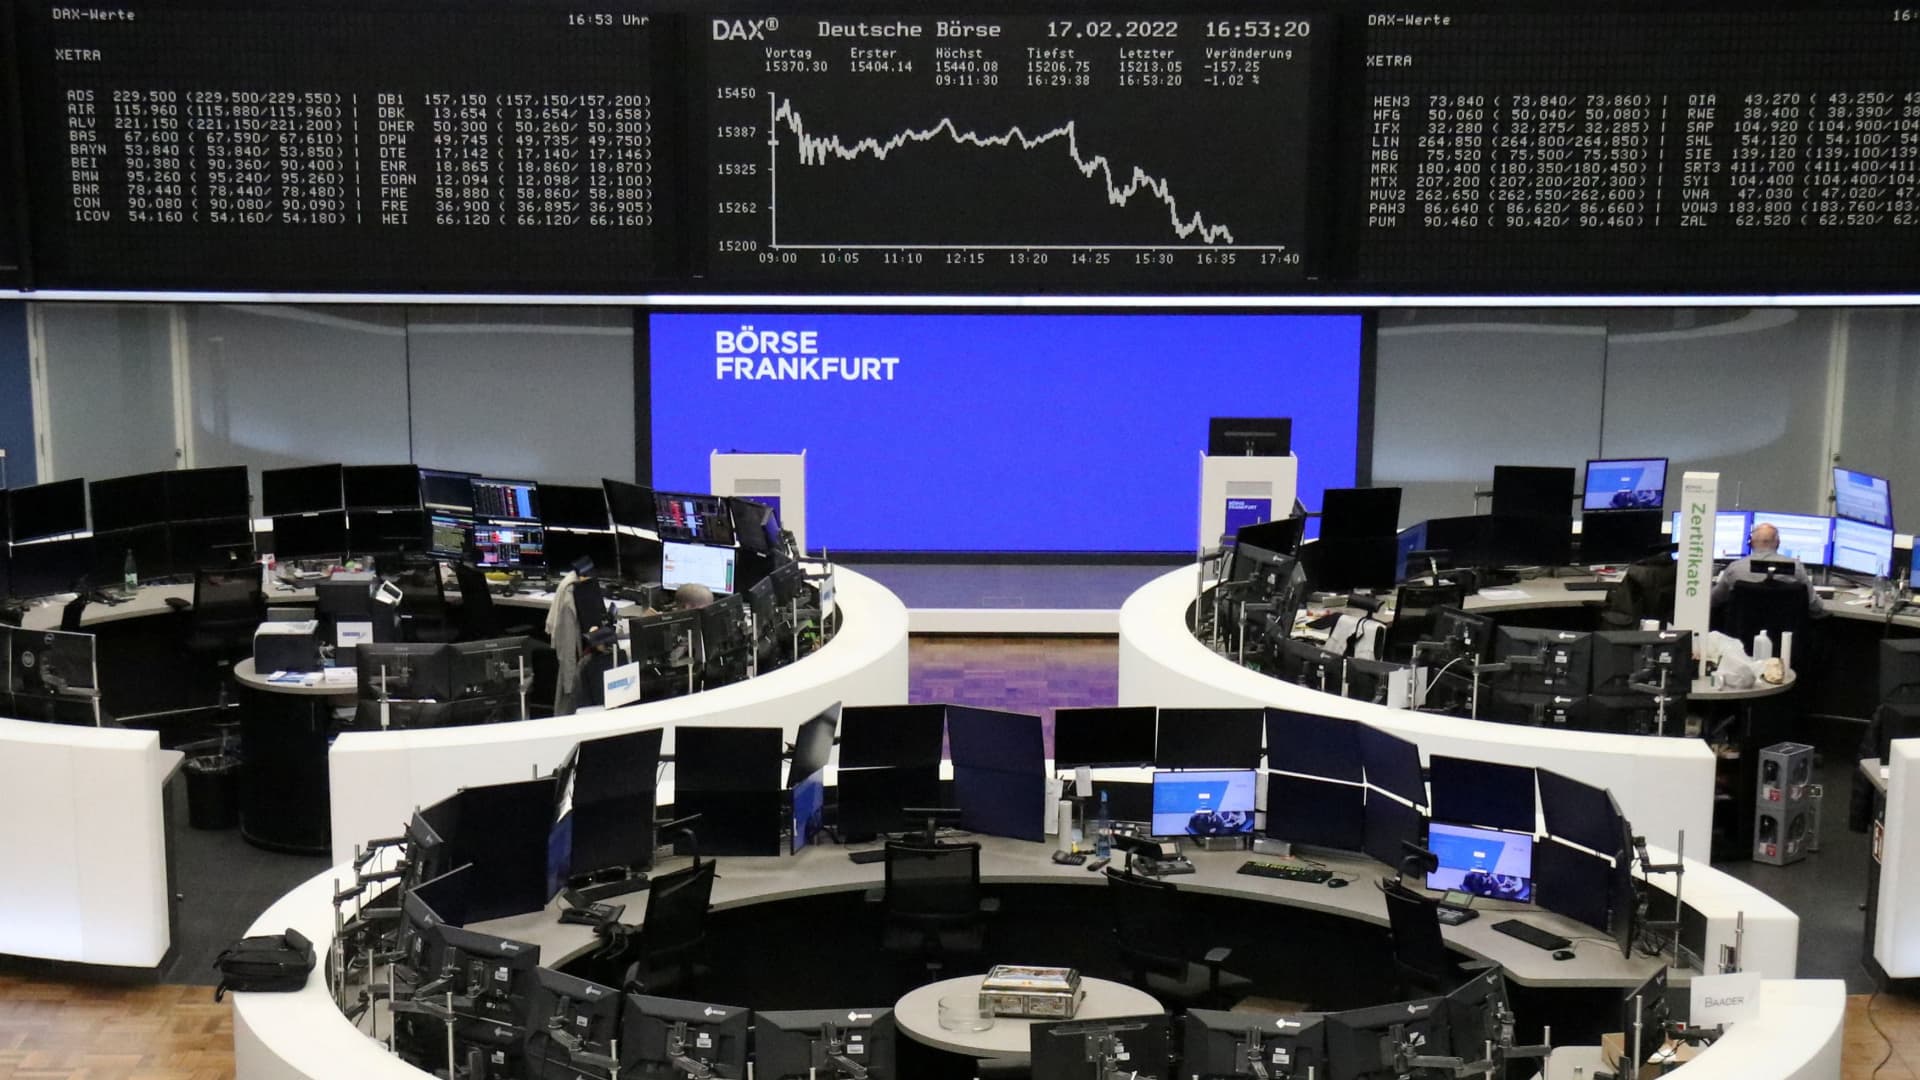 The German share price index DAX graph is pictured at the stock exchange in Frankfurt, Germany, February 17, 2022.